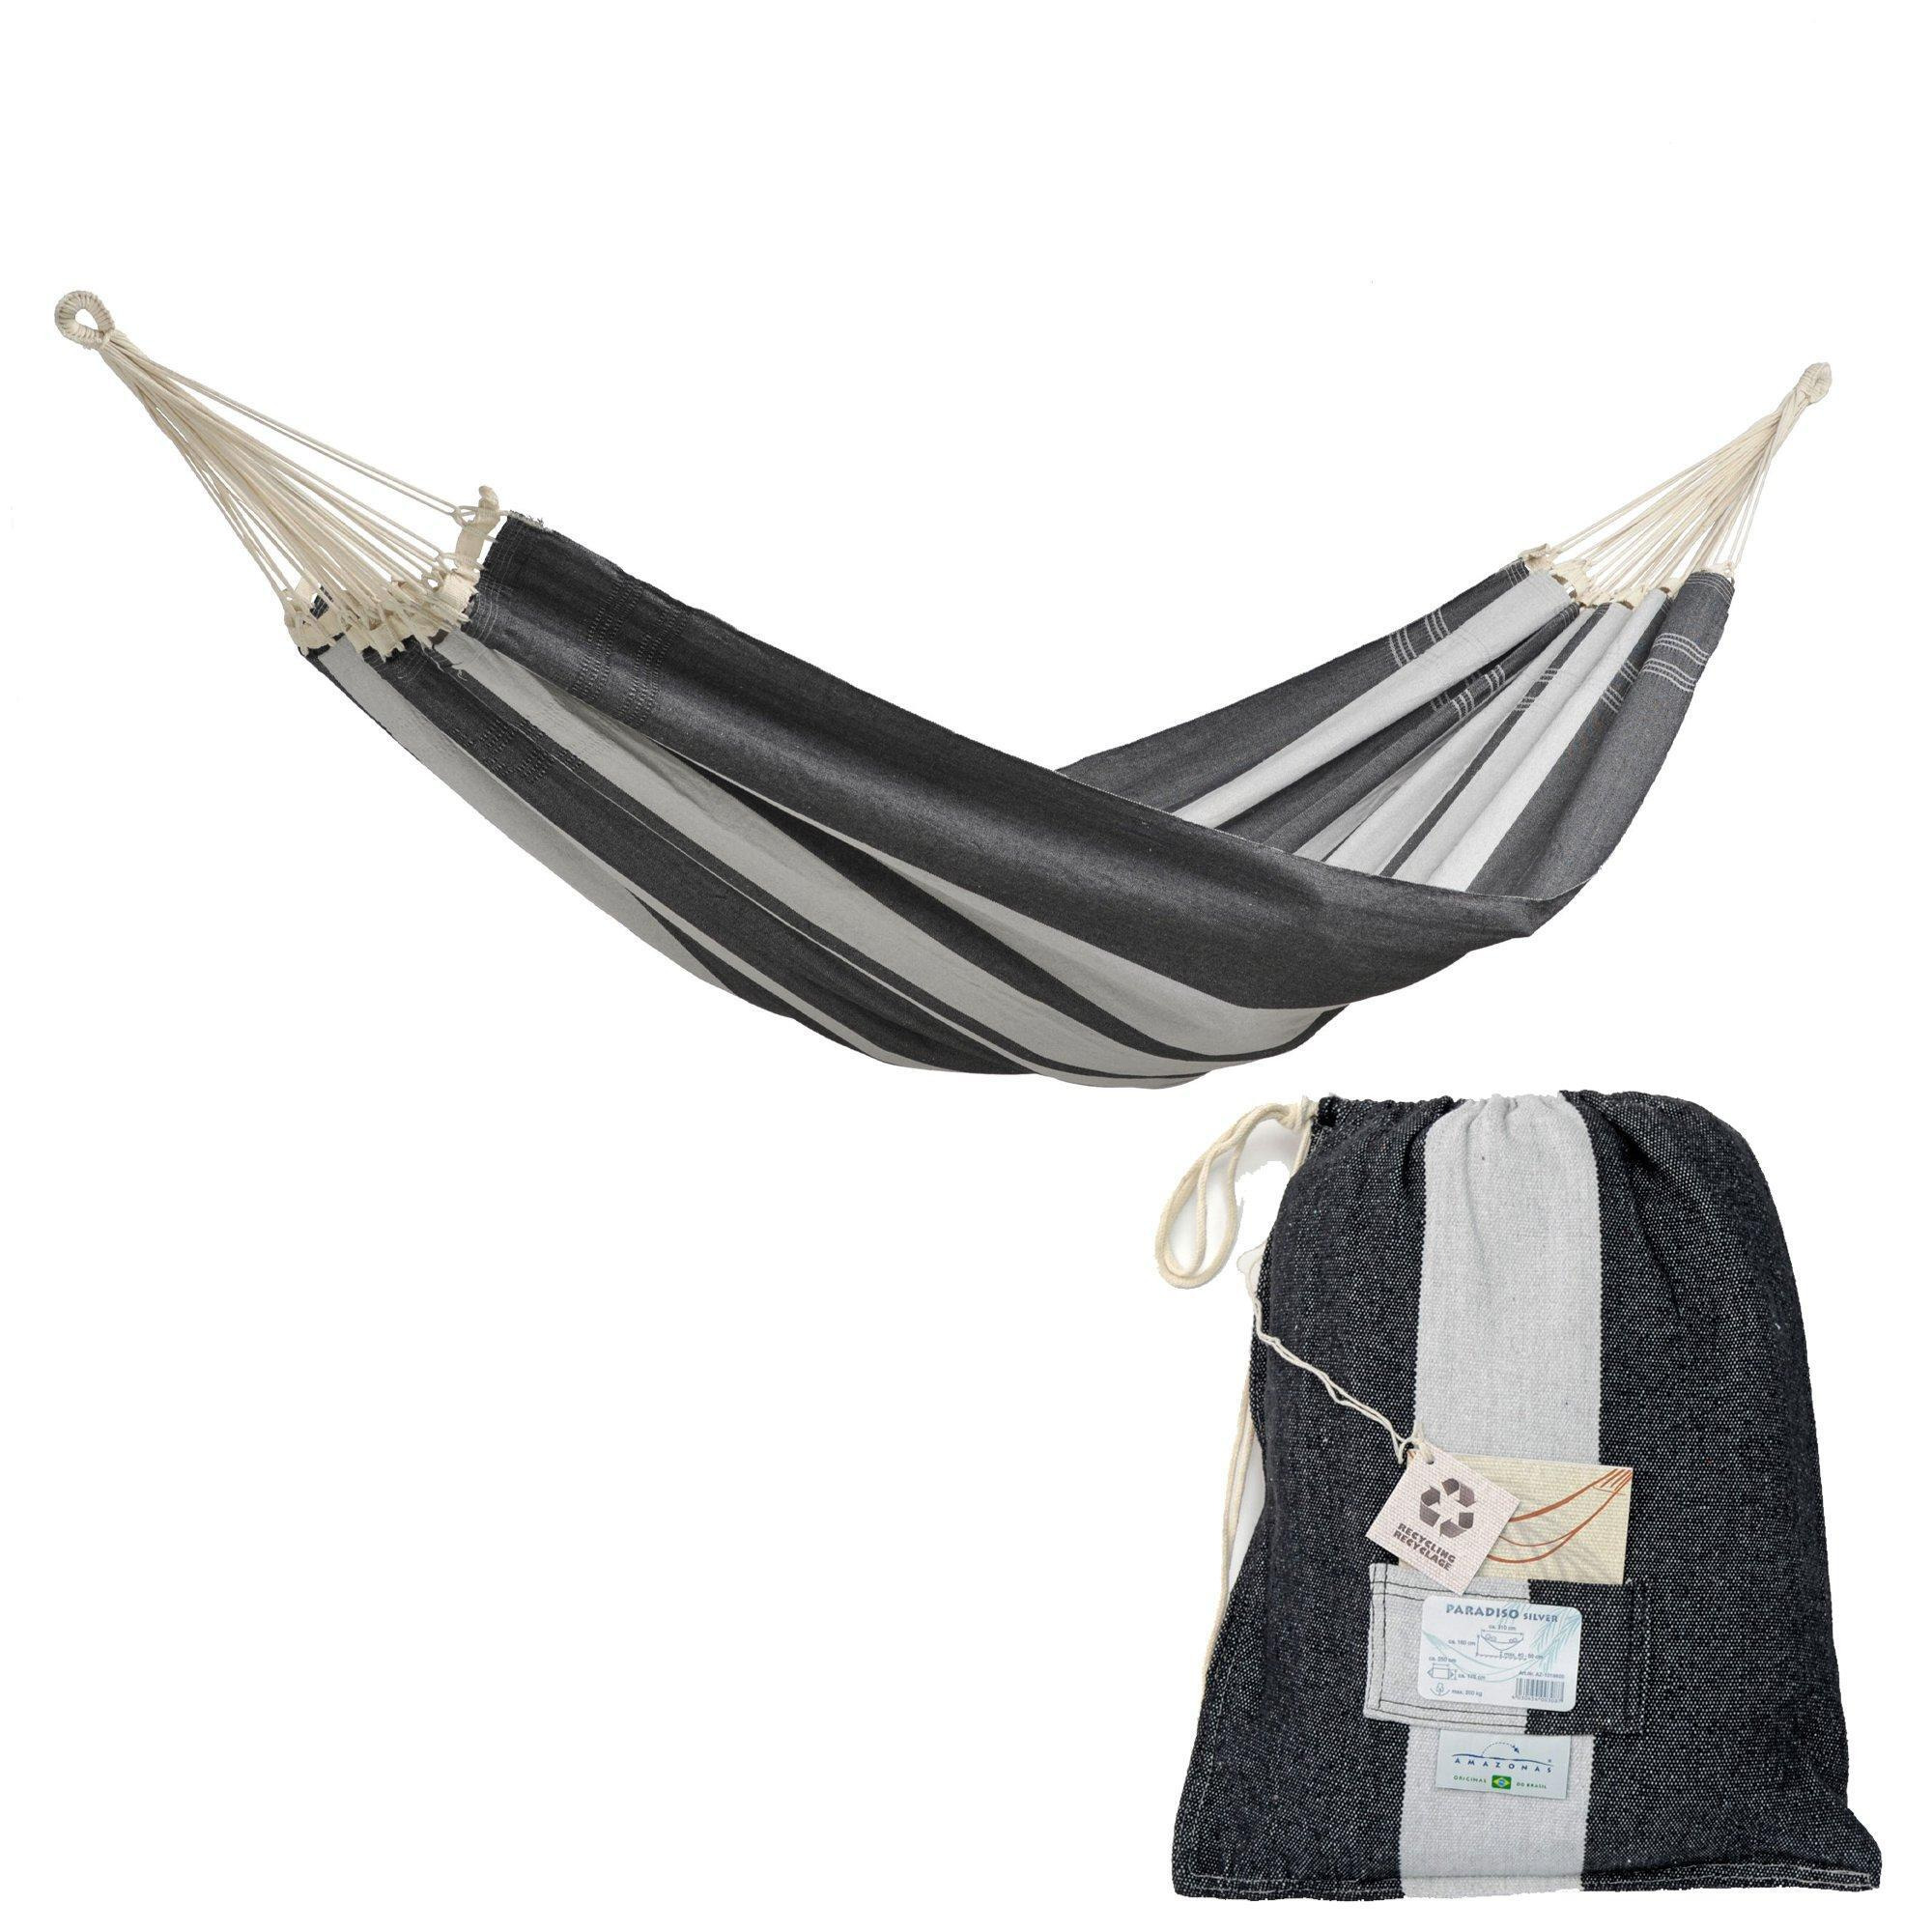 Paradiso Family Sized Handcrafted Garden Hammock with Bag - Silver - image 1